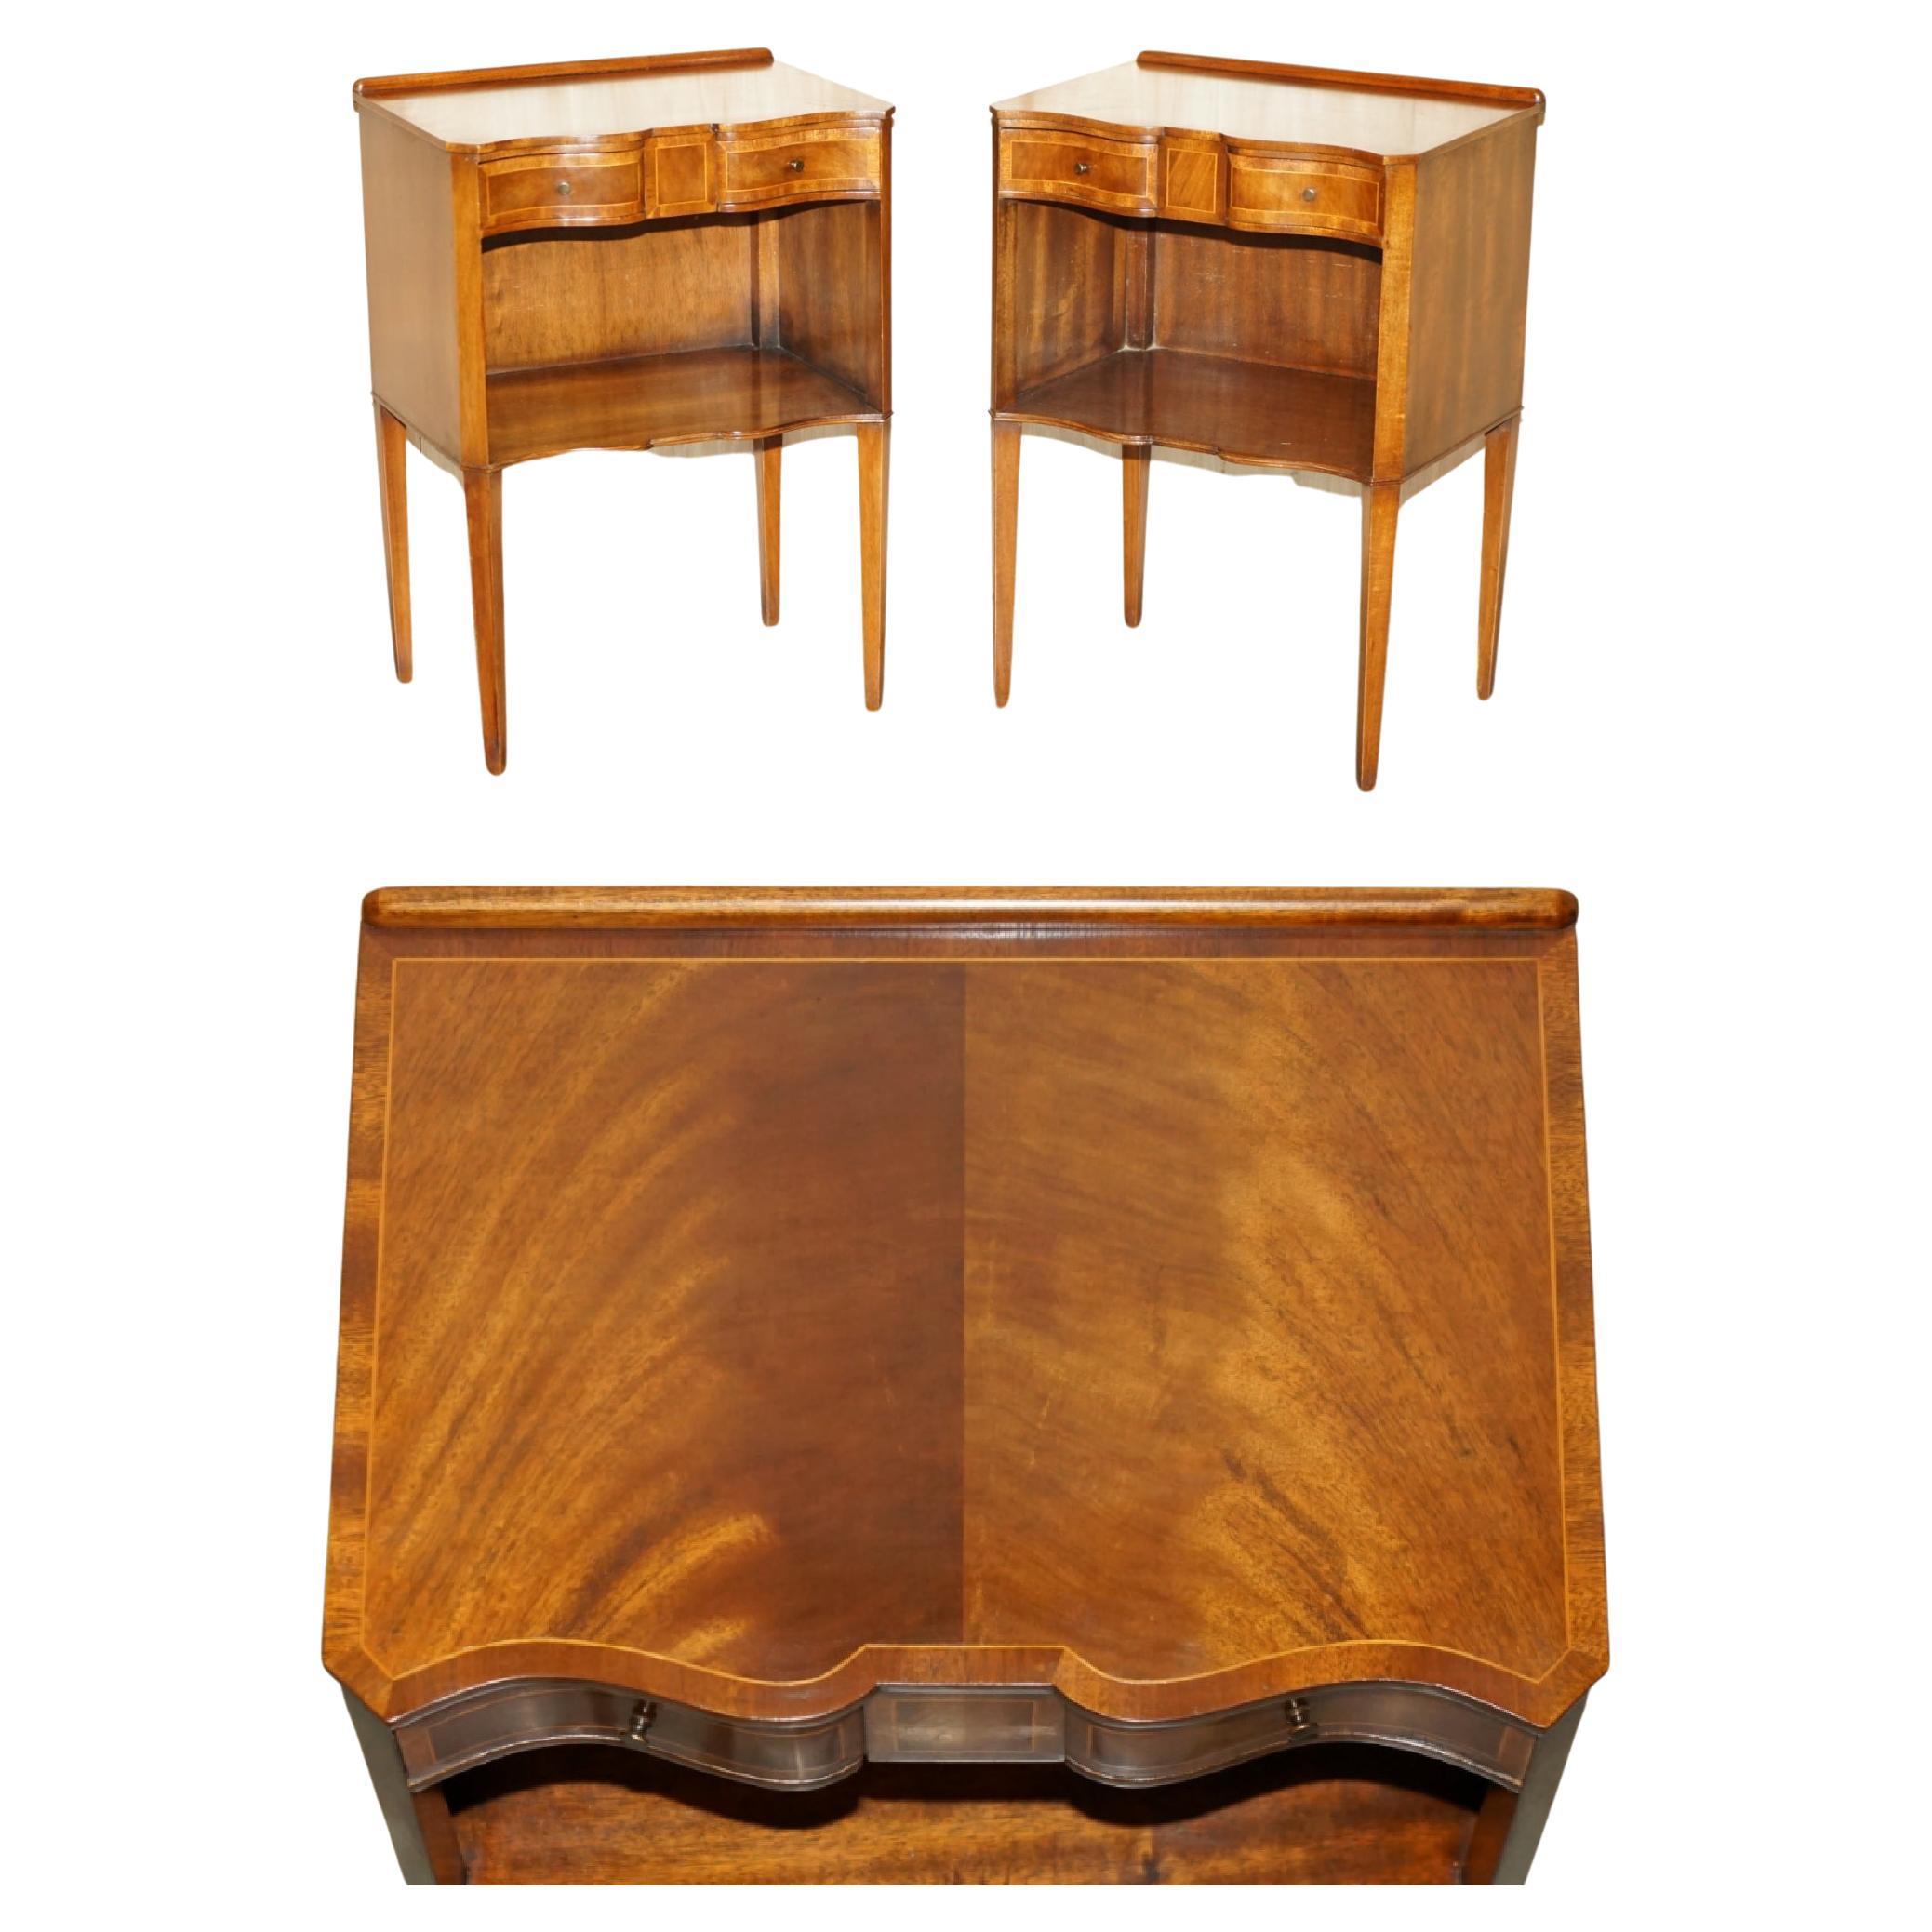 PAiR OF ANTIQUE RESTORED SERPENTINE FRONTED FLAMED HARDWOOD SIDE END LAMP TABLES For Sale